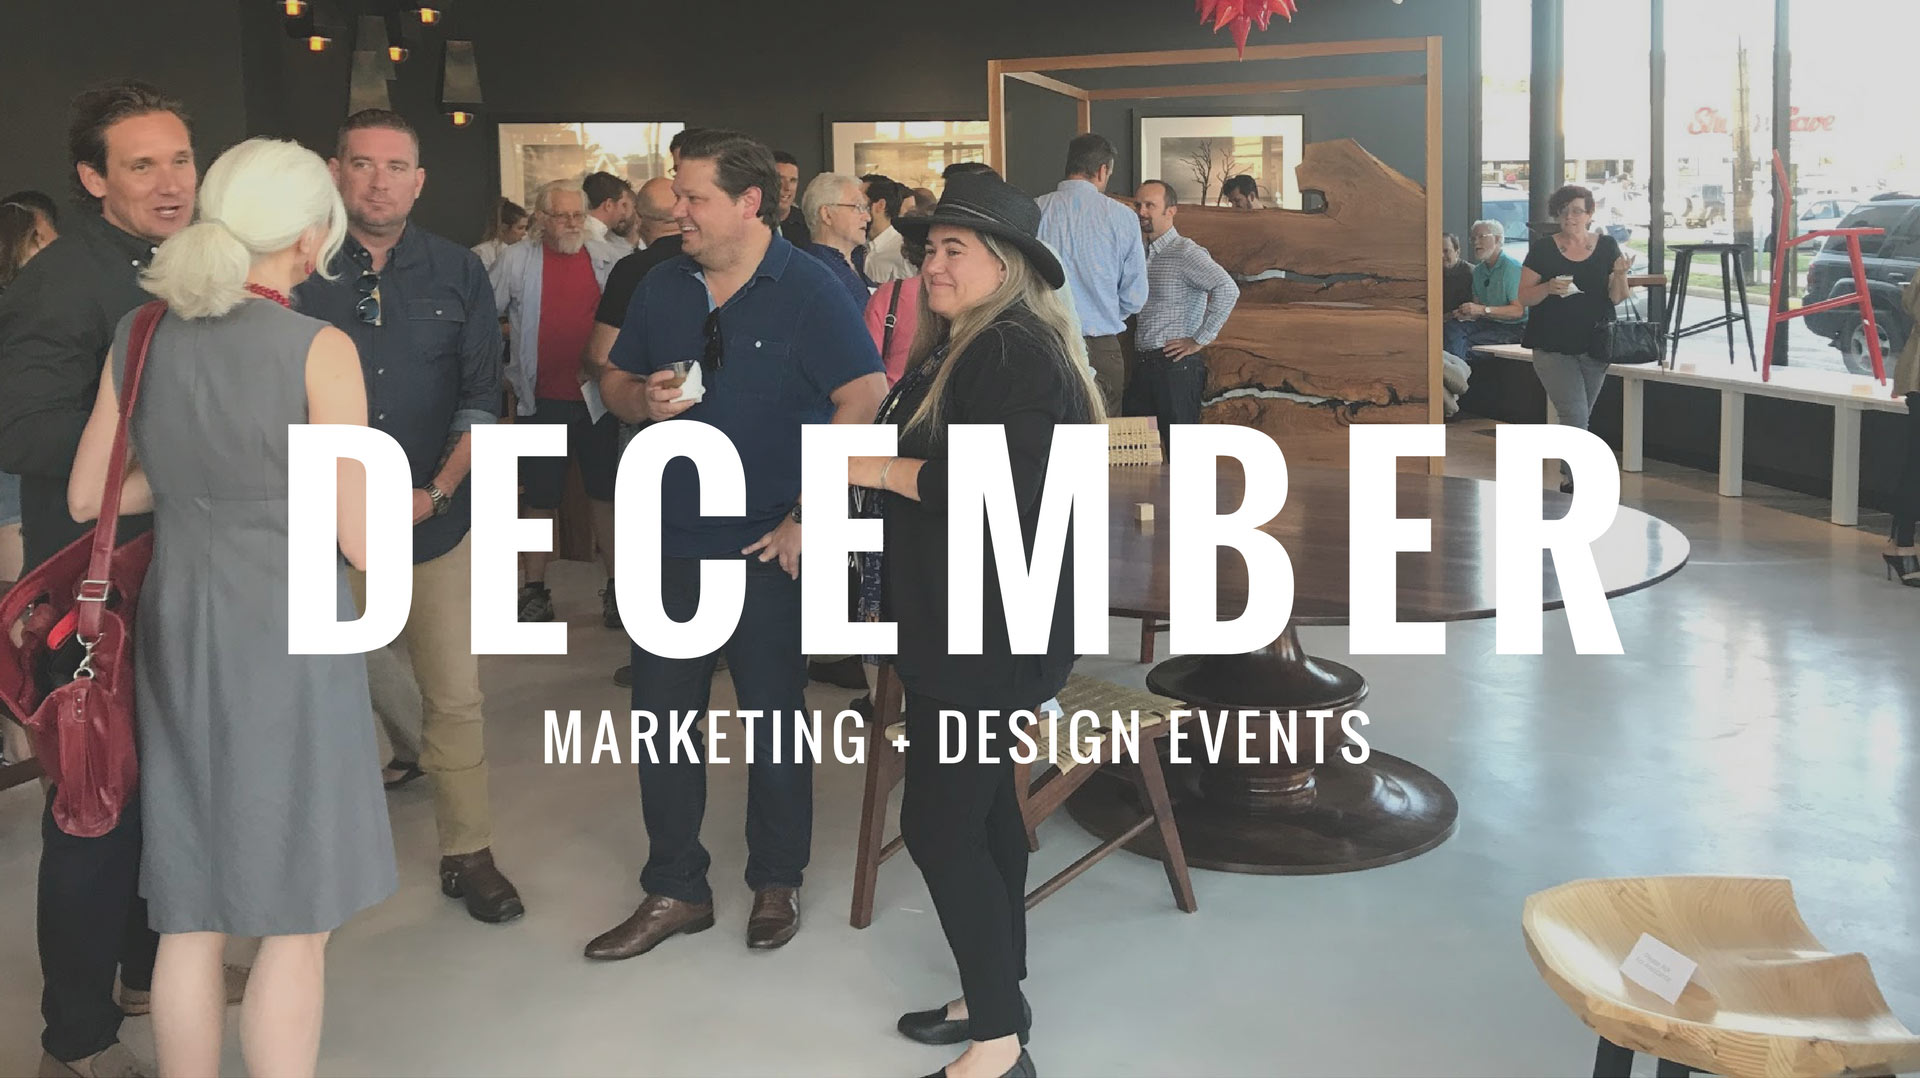 December 2017 Marketing and Design events in St. Louis